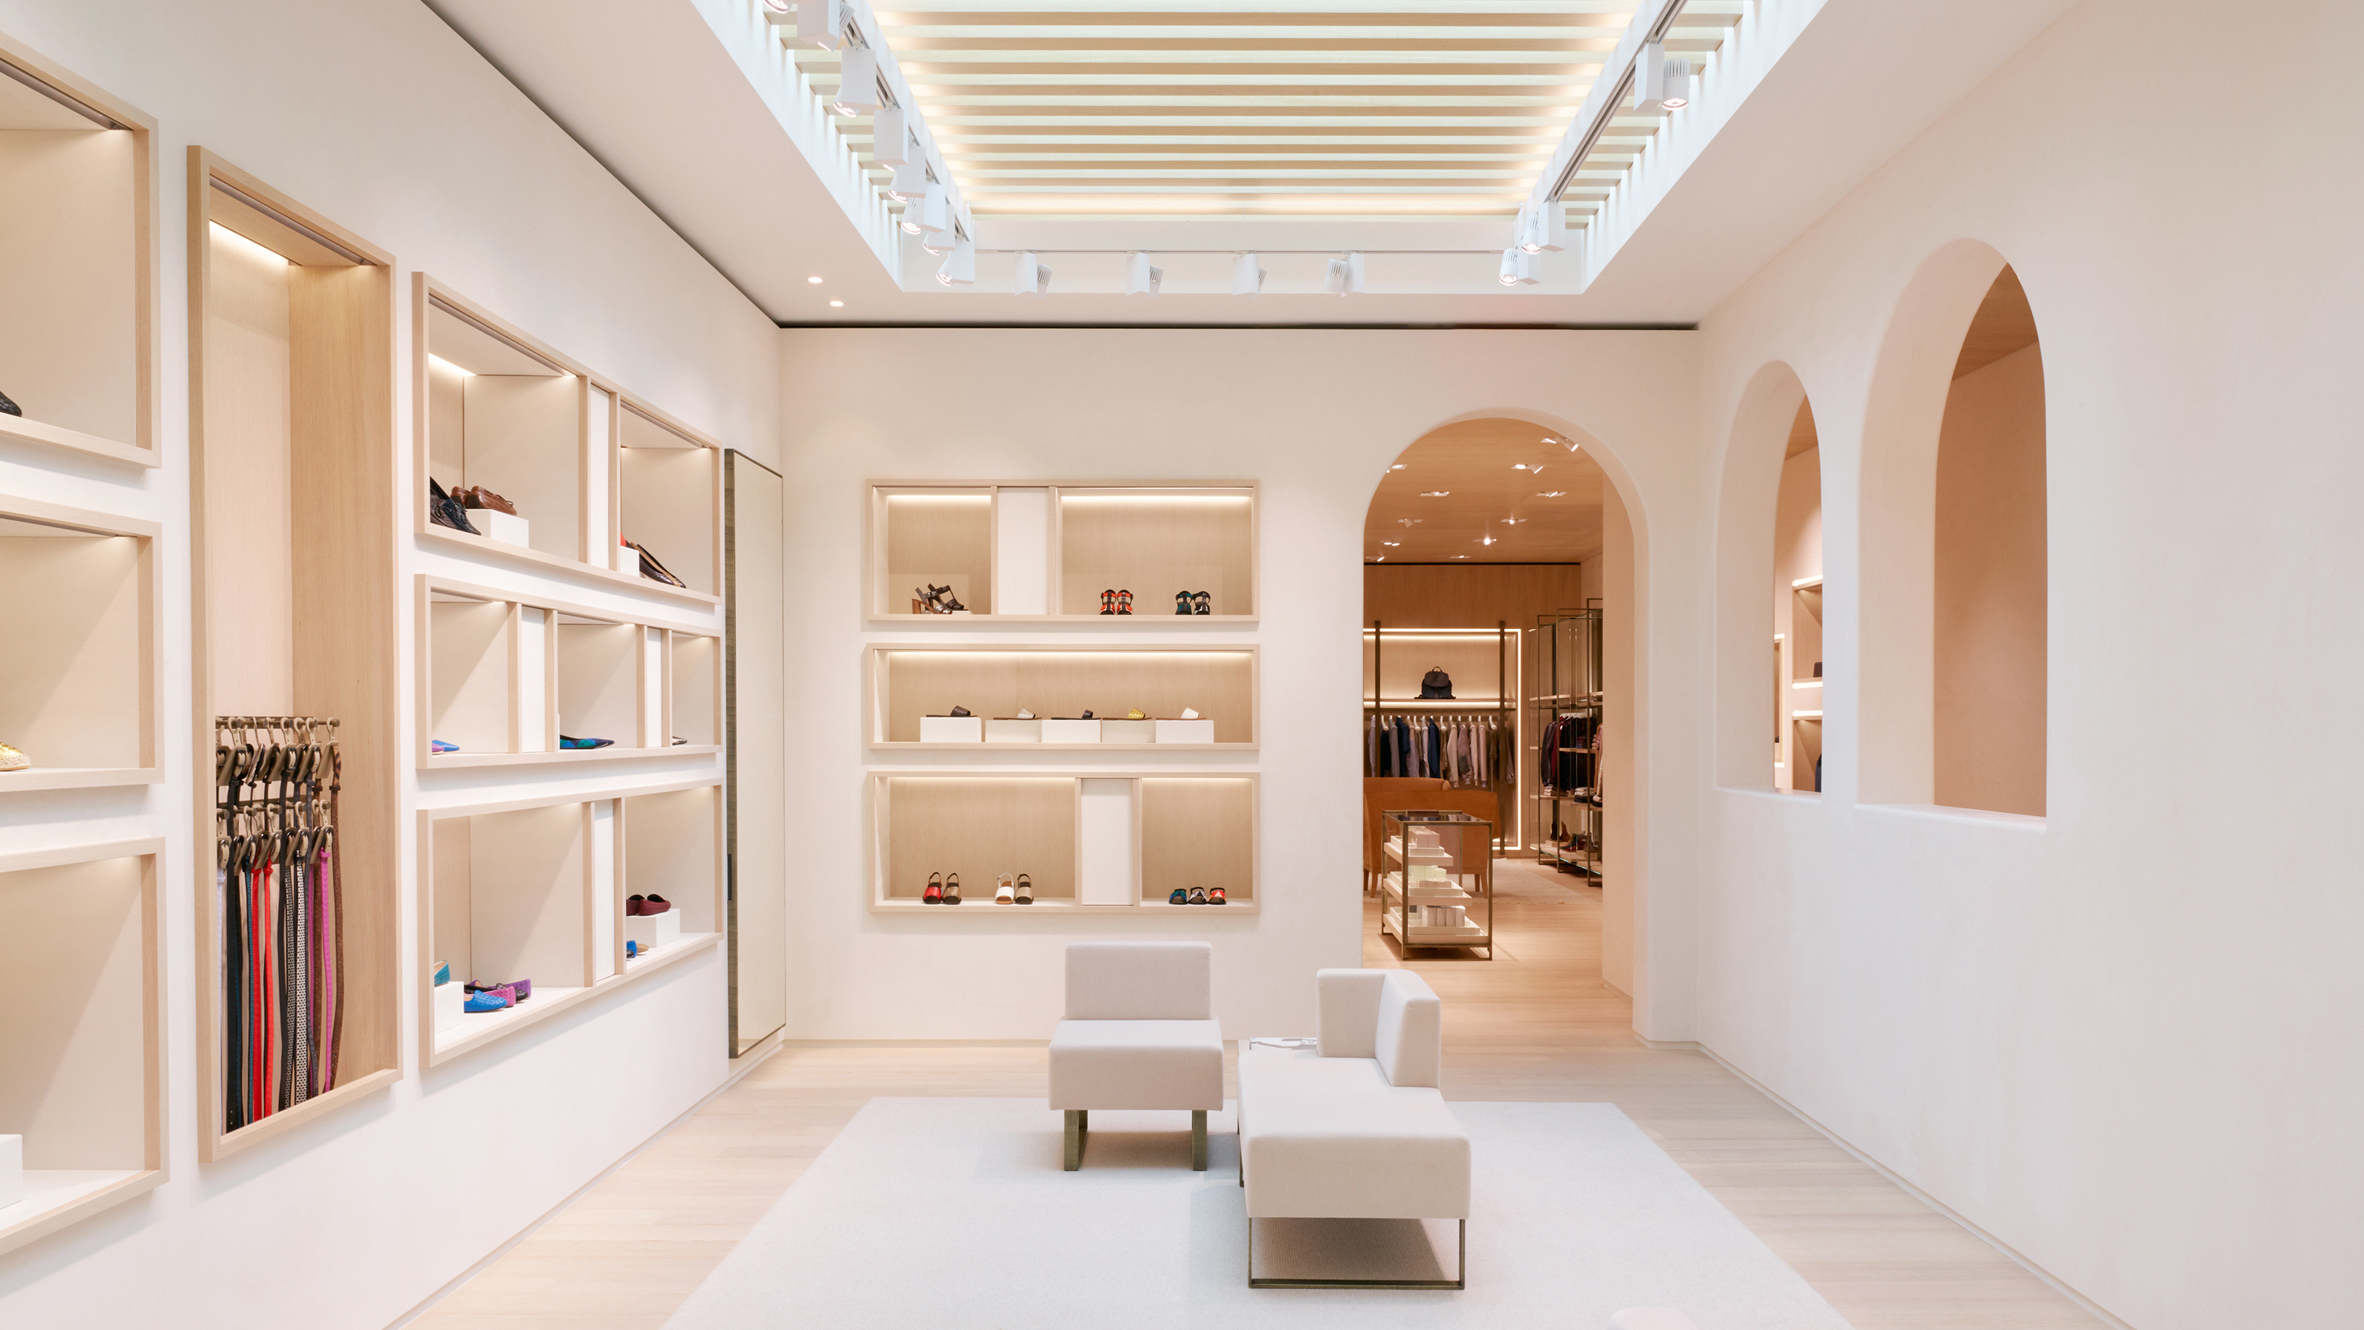 10 of the best fashion boutiques from Dezeen's Pinterest boards